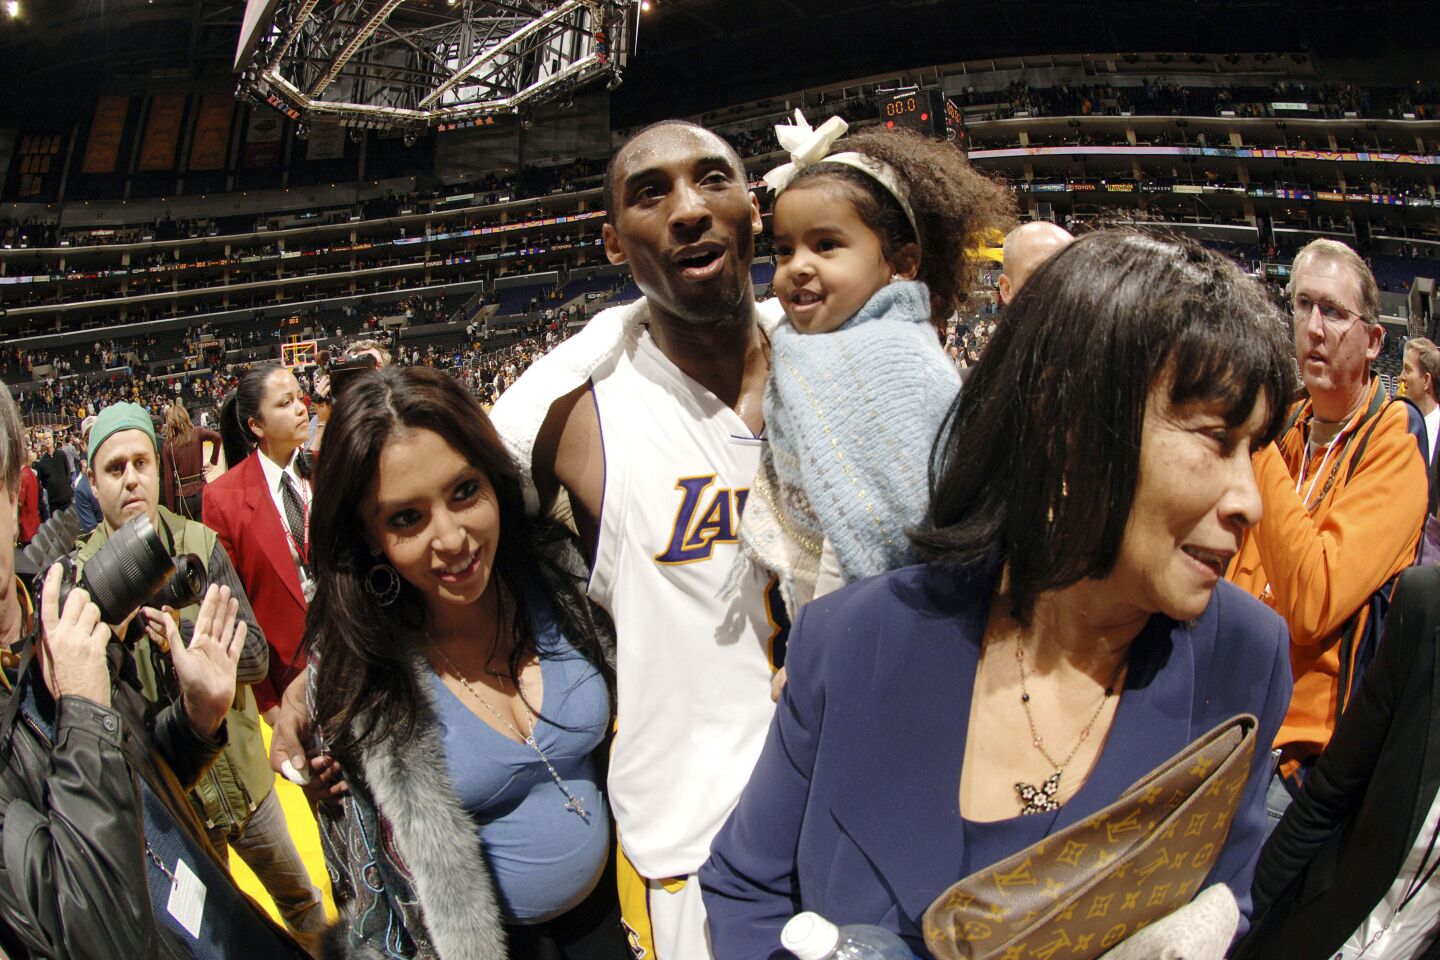 Among a crowd, Kobe Bryant walks off the court, carrying daughter Natalia, with wife Vanessa after scoring 81 points.